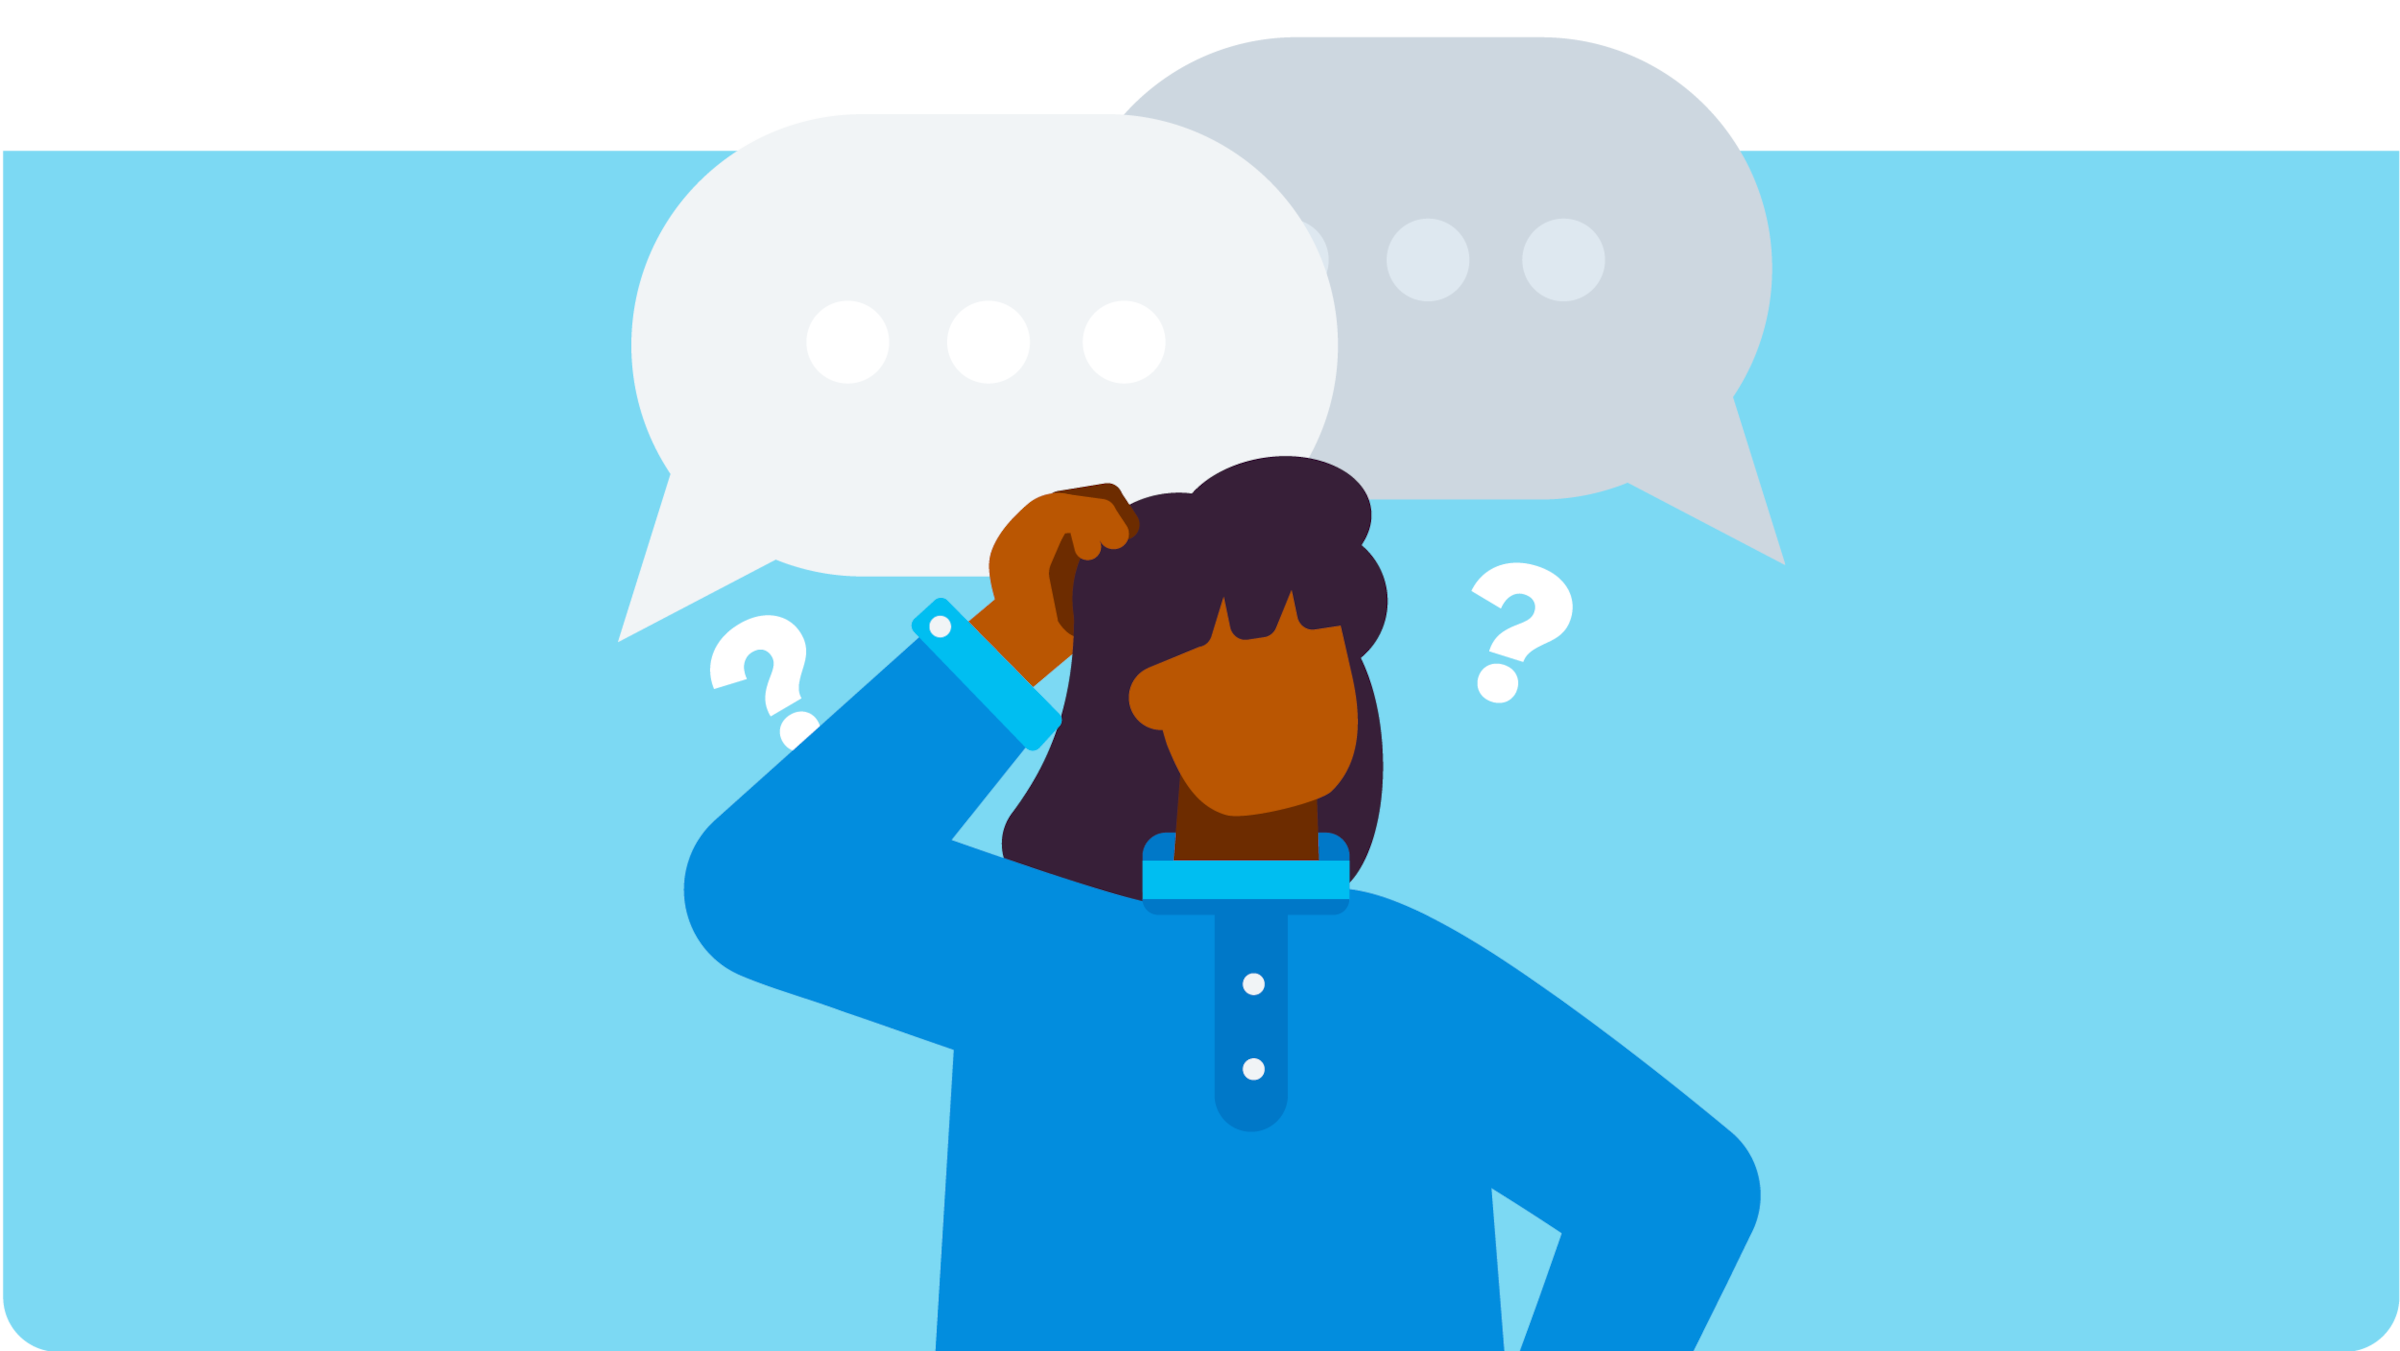 Illustrated person scratching head with question marks and chat boxes surrounding their head.